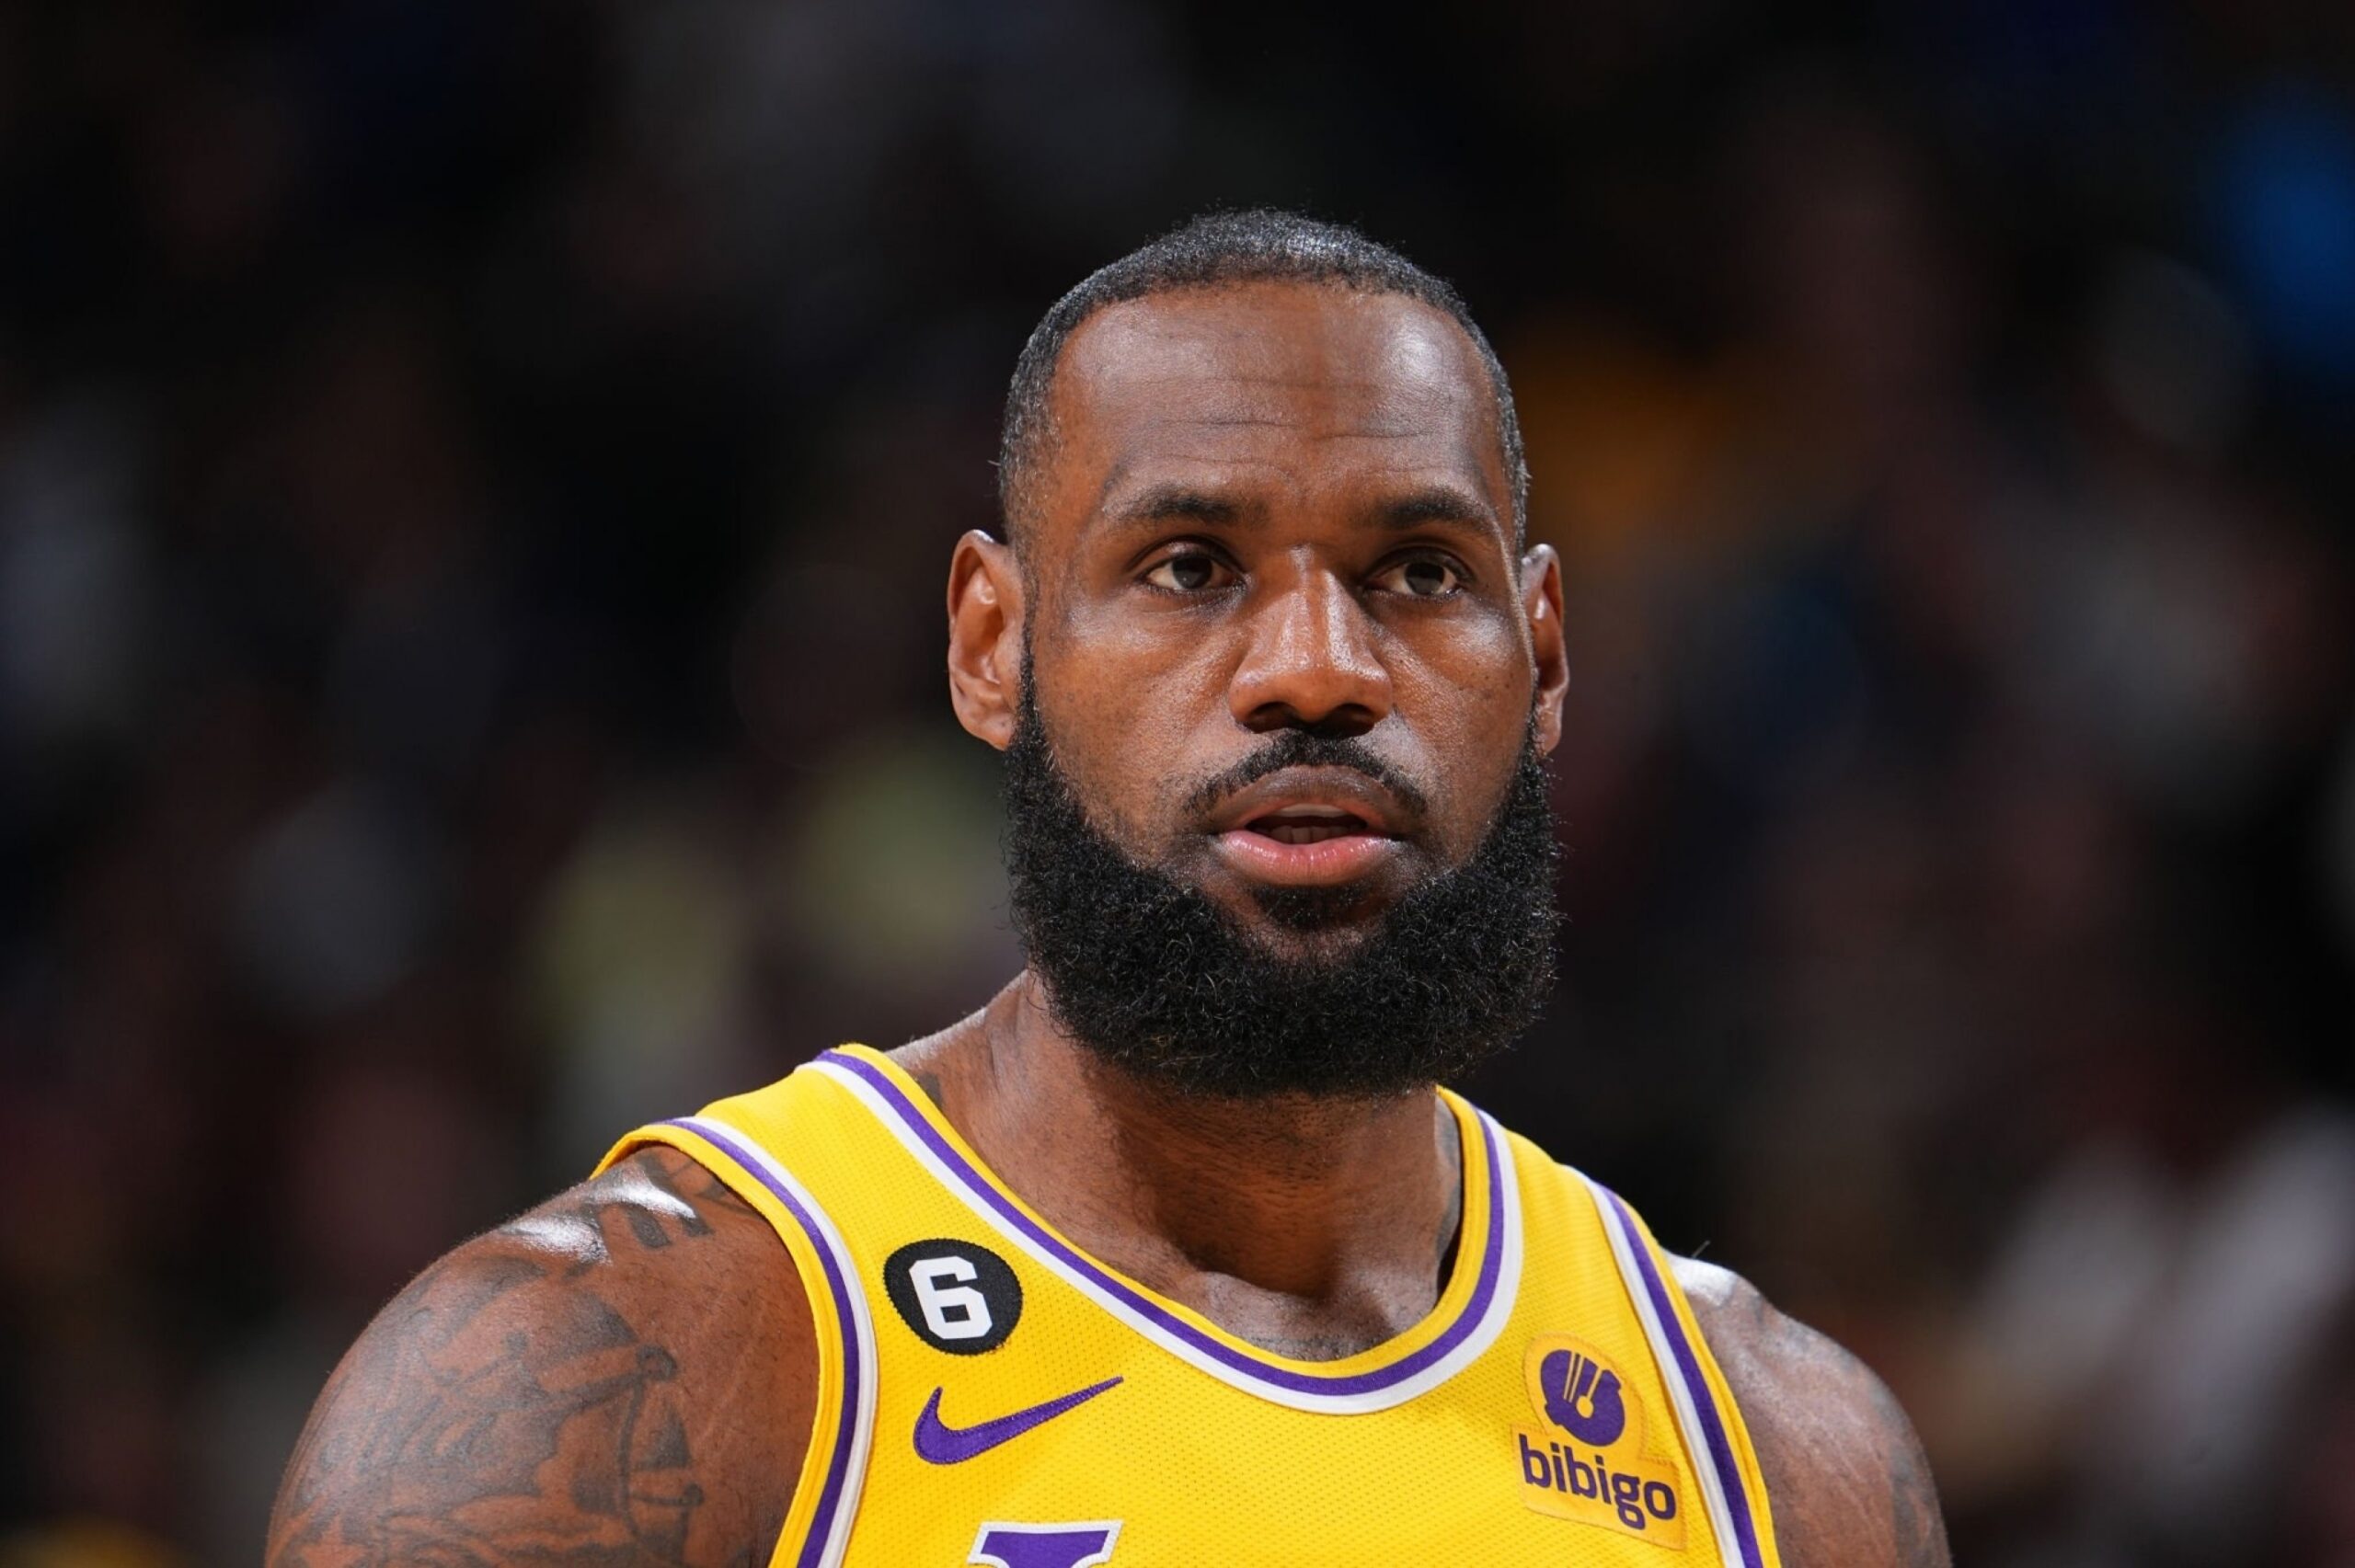 LeBron James is unapologetic about the Lakers' recent losing streak